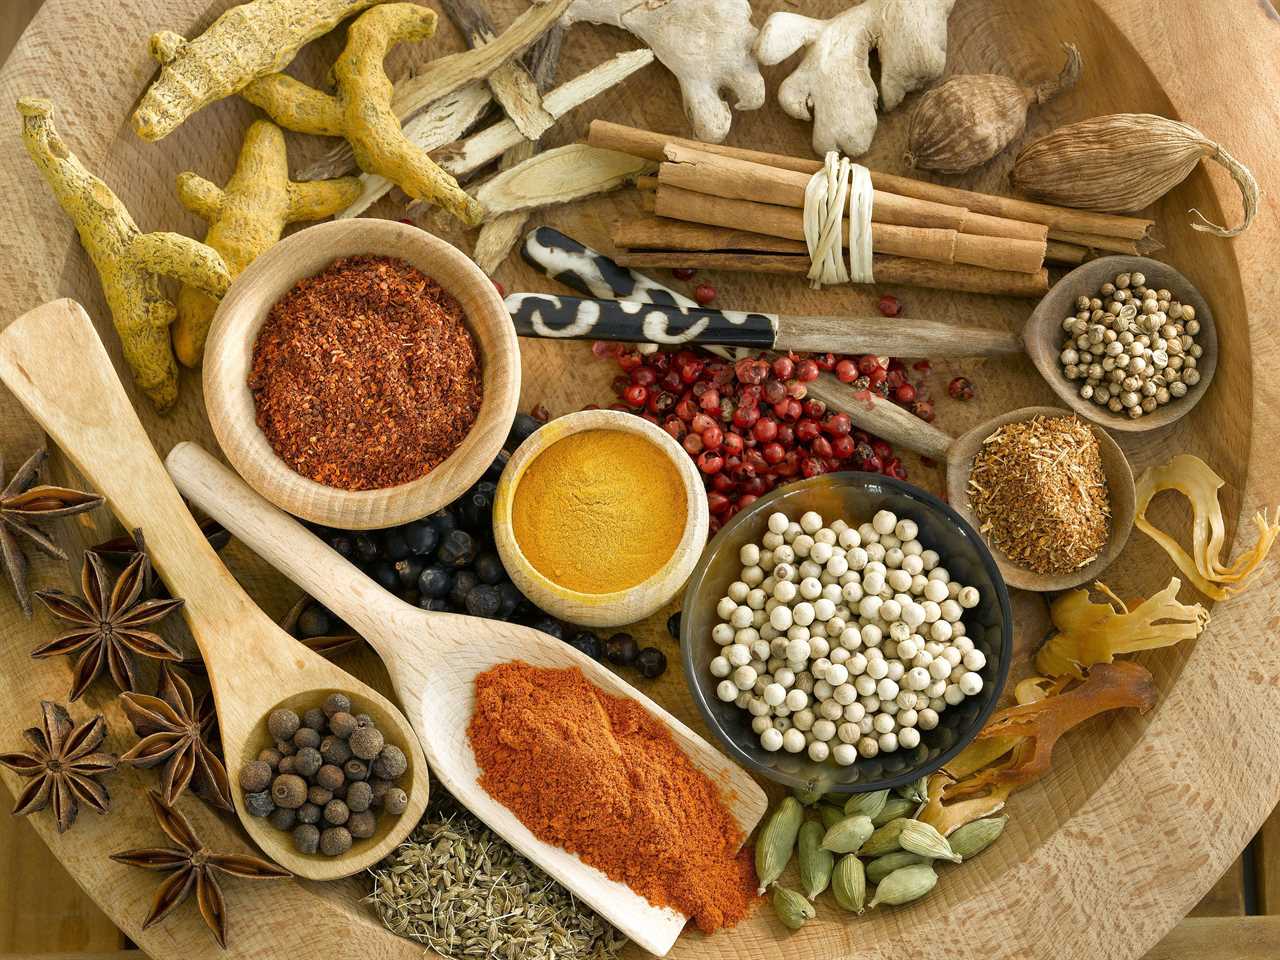 African Spice Blends For Meat